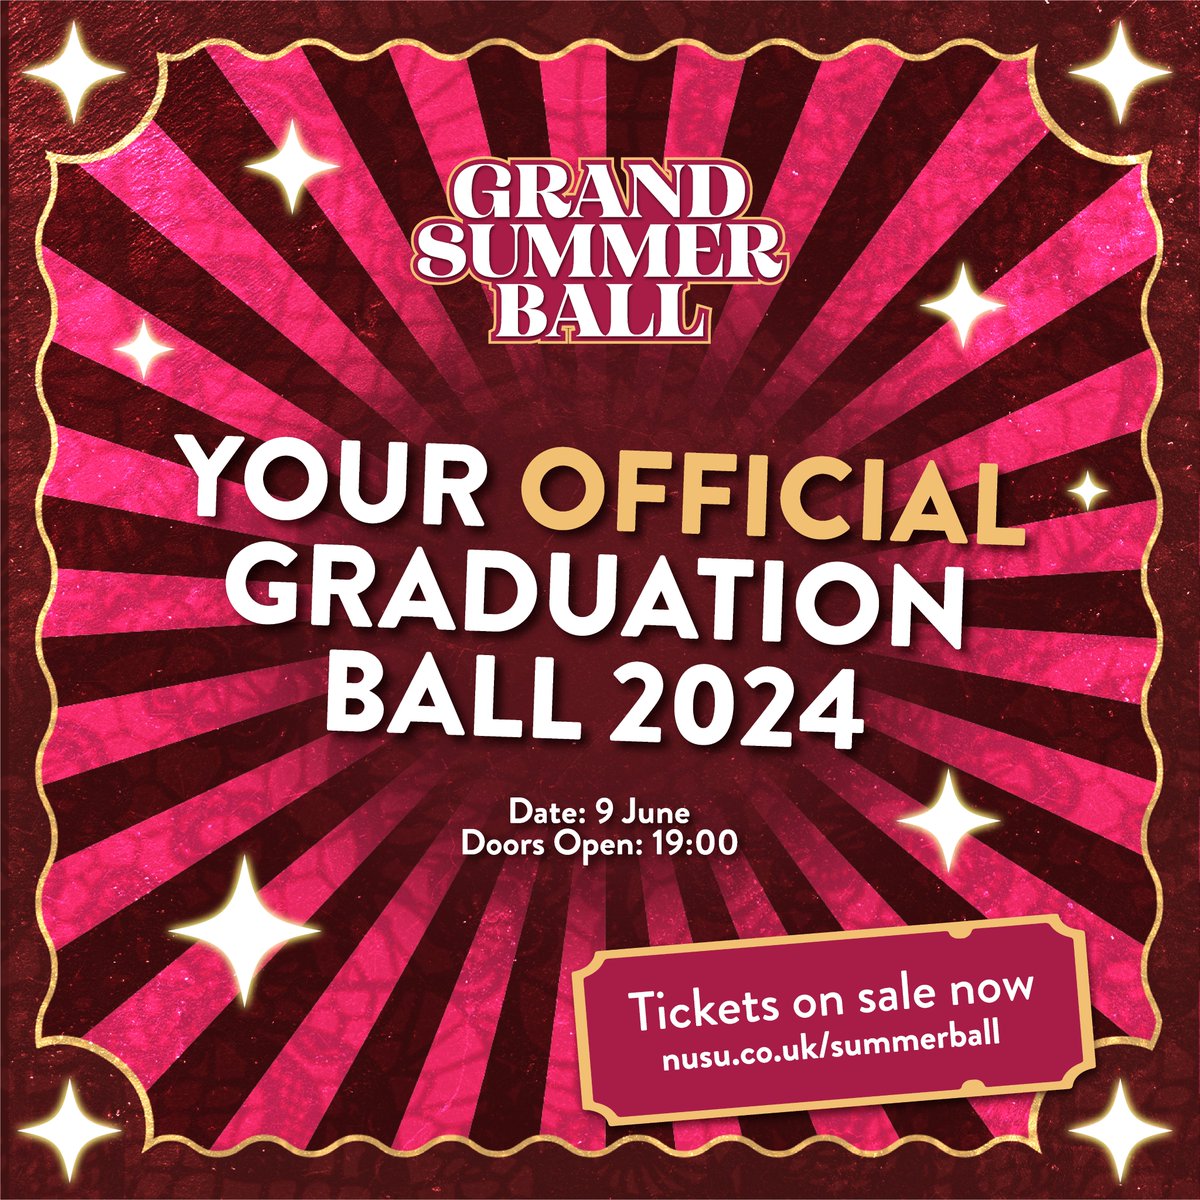 Did you know you can bring a plus one to our official graduation ball, who isn't part of Newcastle University? This means you can have all your friends together for one huge celebration! nusu.co.uk/summerball